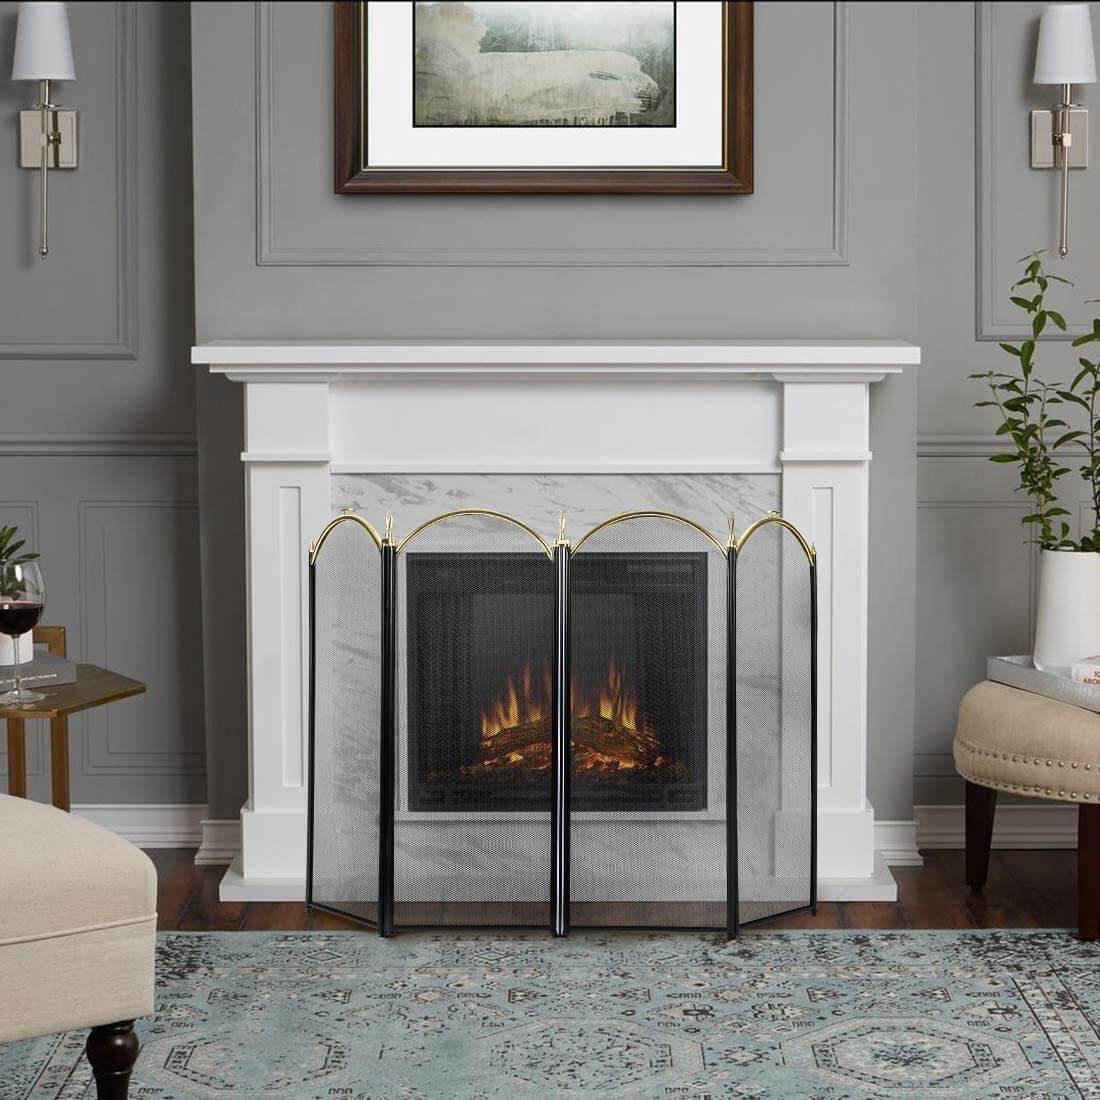 How To Baby Proof Fireplace With A Fireplace Safety Screen